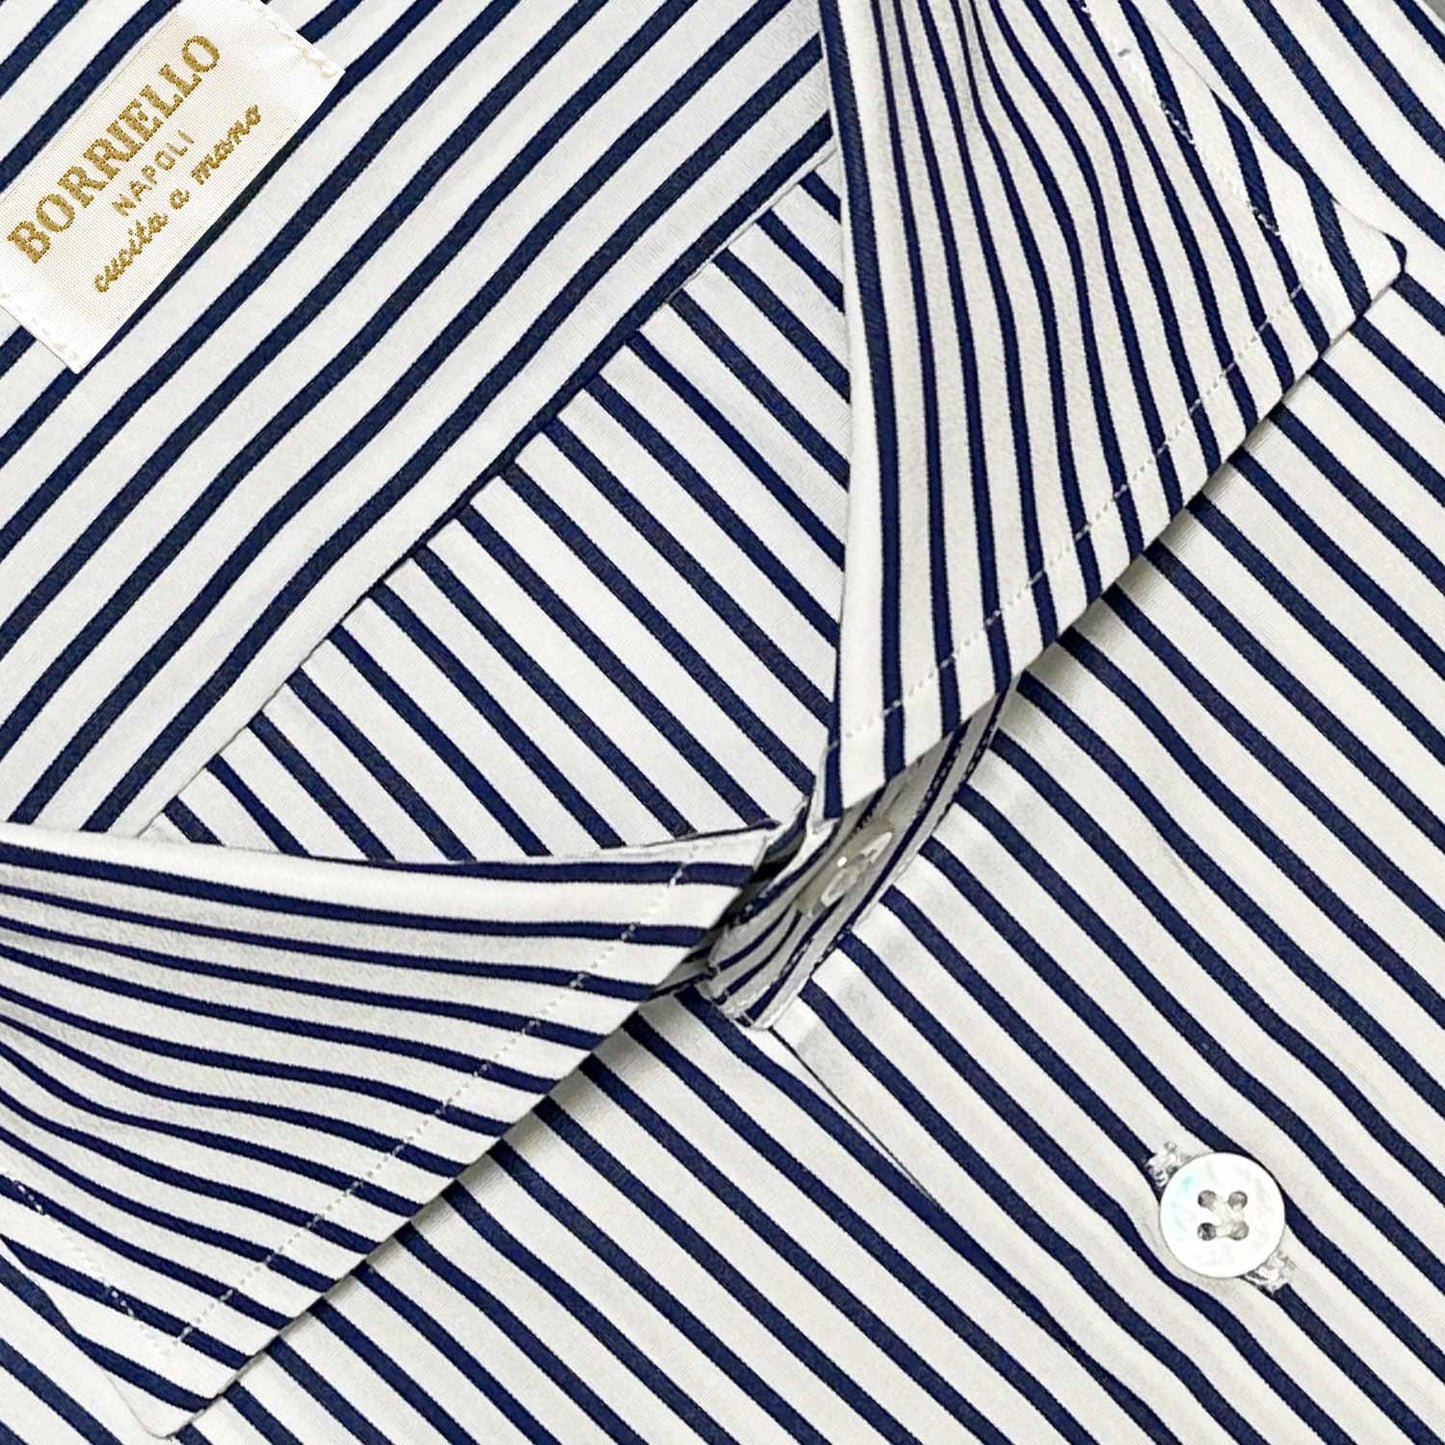 Load image into Gallery viewer, Classic blue striped shirt made with Thomas Mason fabric yarn-dyed in popeline cotton. Handmade shirt by Borriello Napoli exclusive for Wools Boutique Uomo, ideal both for the office and for more formal occasions with a bright appearance and a soft and smooth hand.
